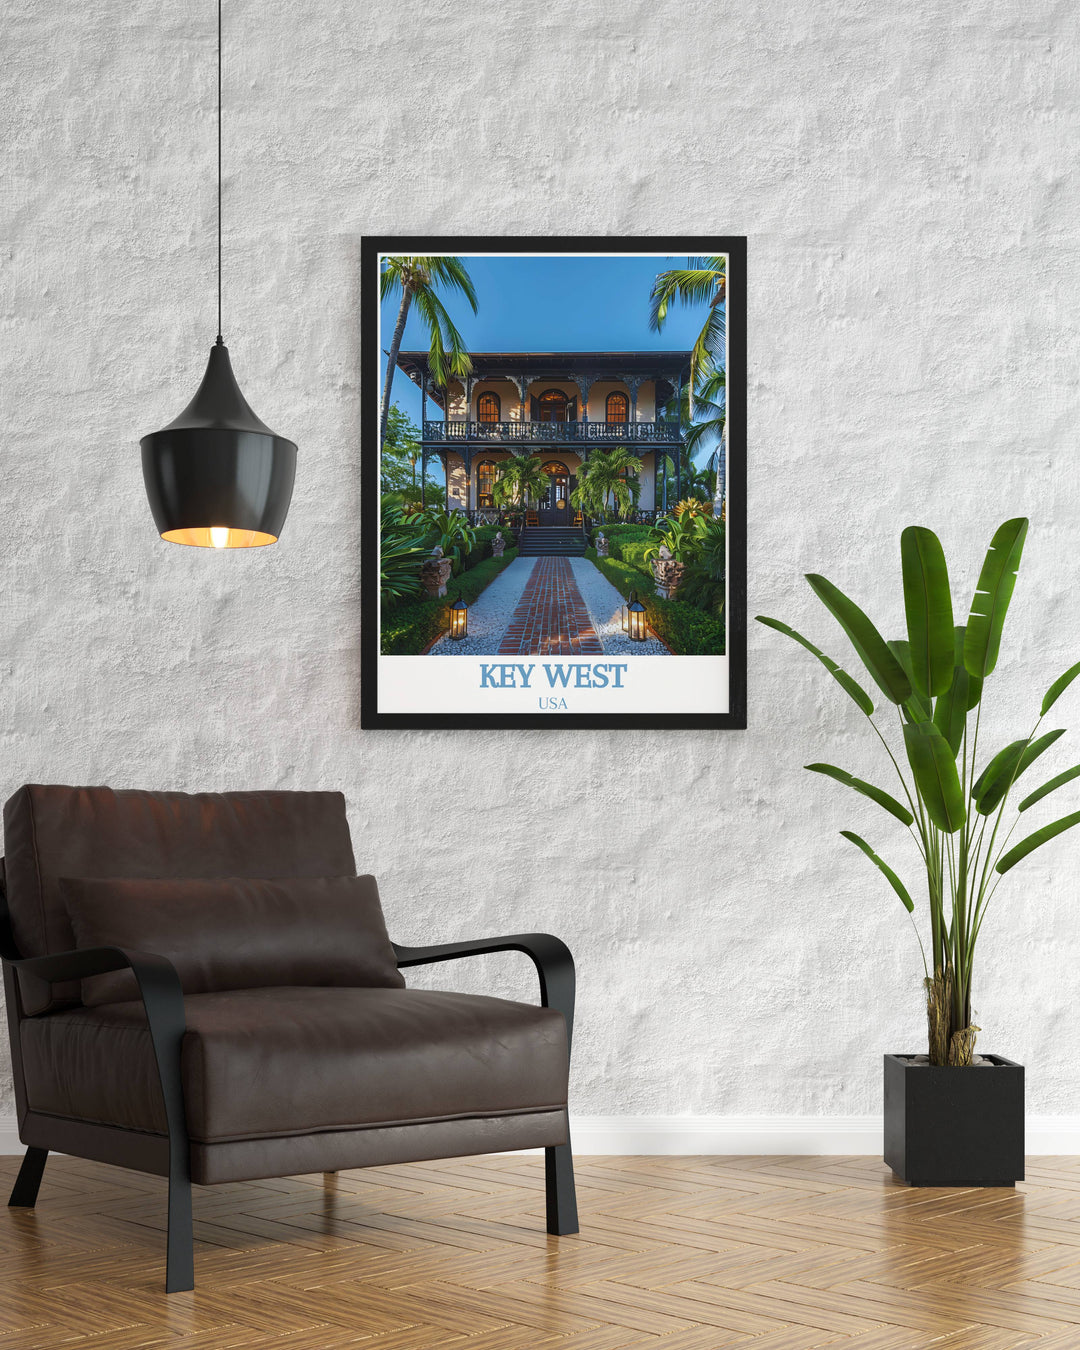 Exquisite Key West Wall Art of the Ernest Hemingway Home and Museum a must have Florida Art Poster that adds a touch of historical charm to any room.